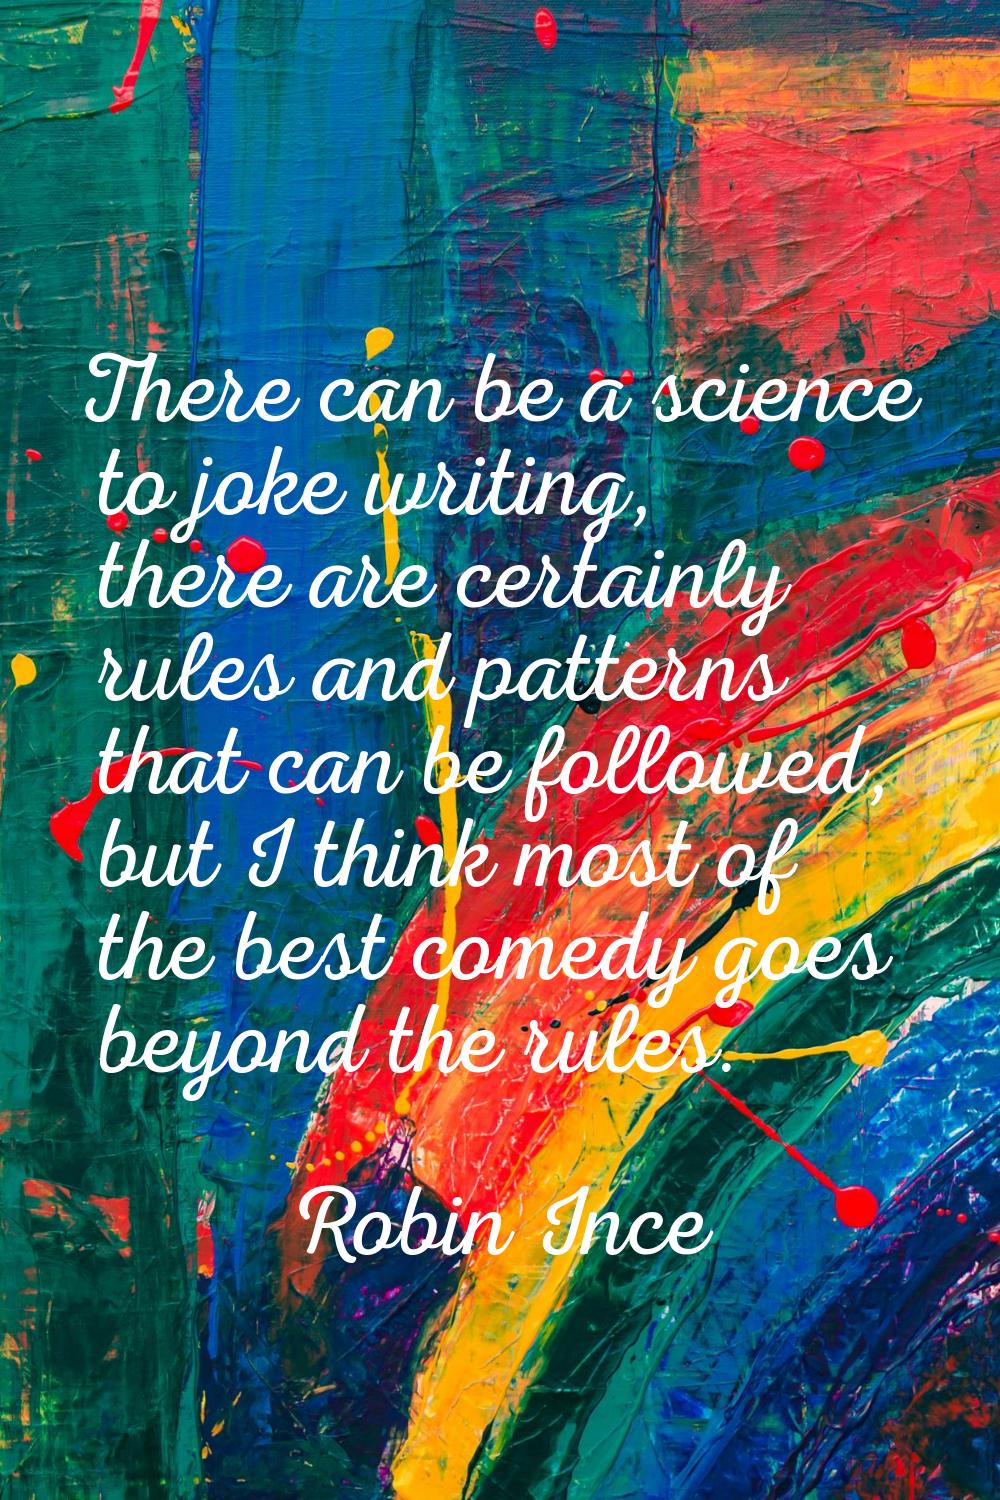 There can be a science to joke writing, there are certainly rules and patterns that can be followed